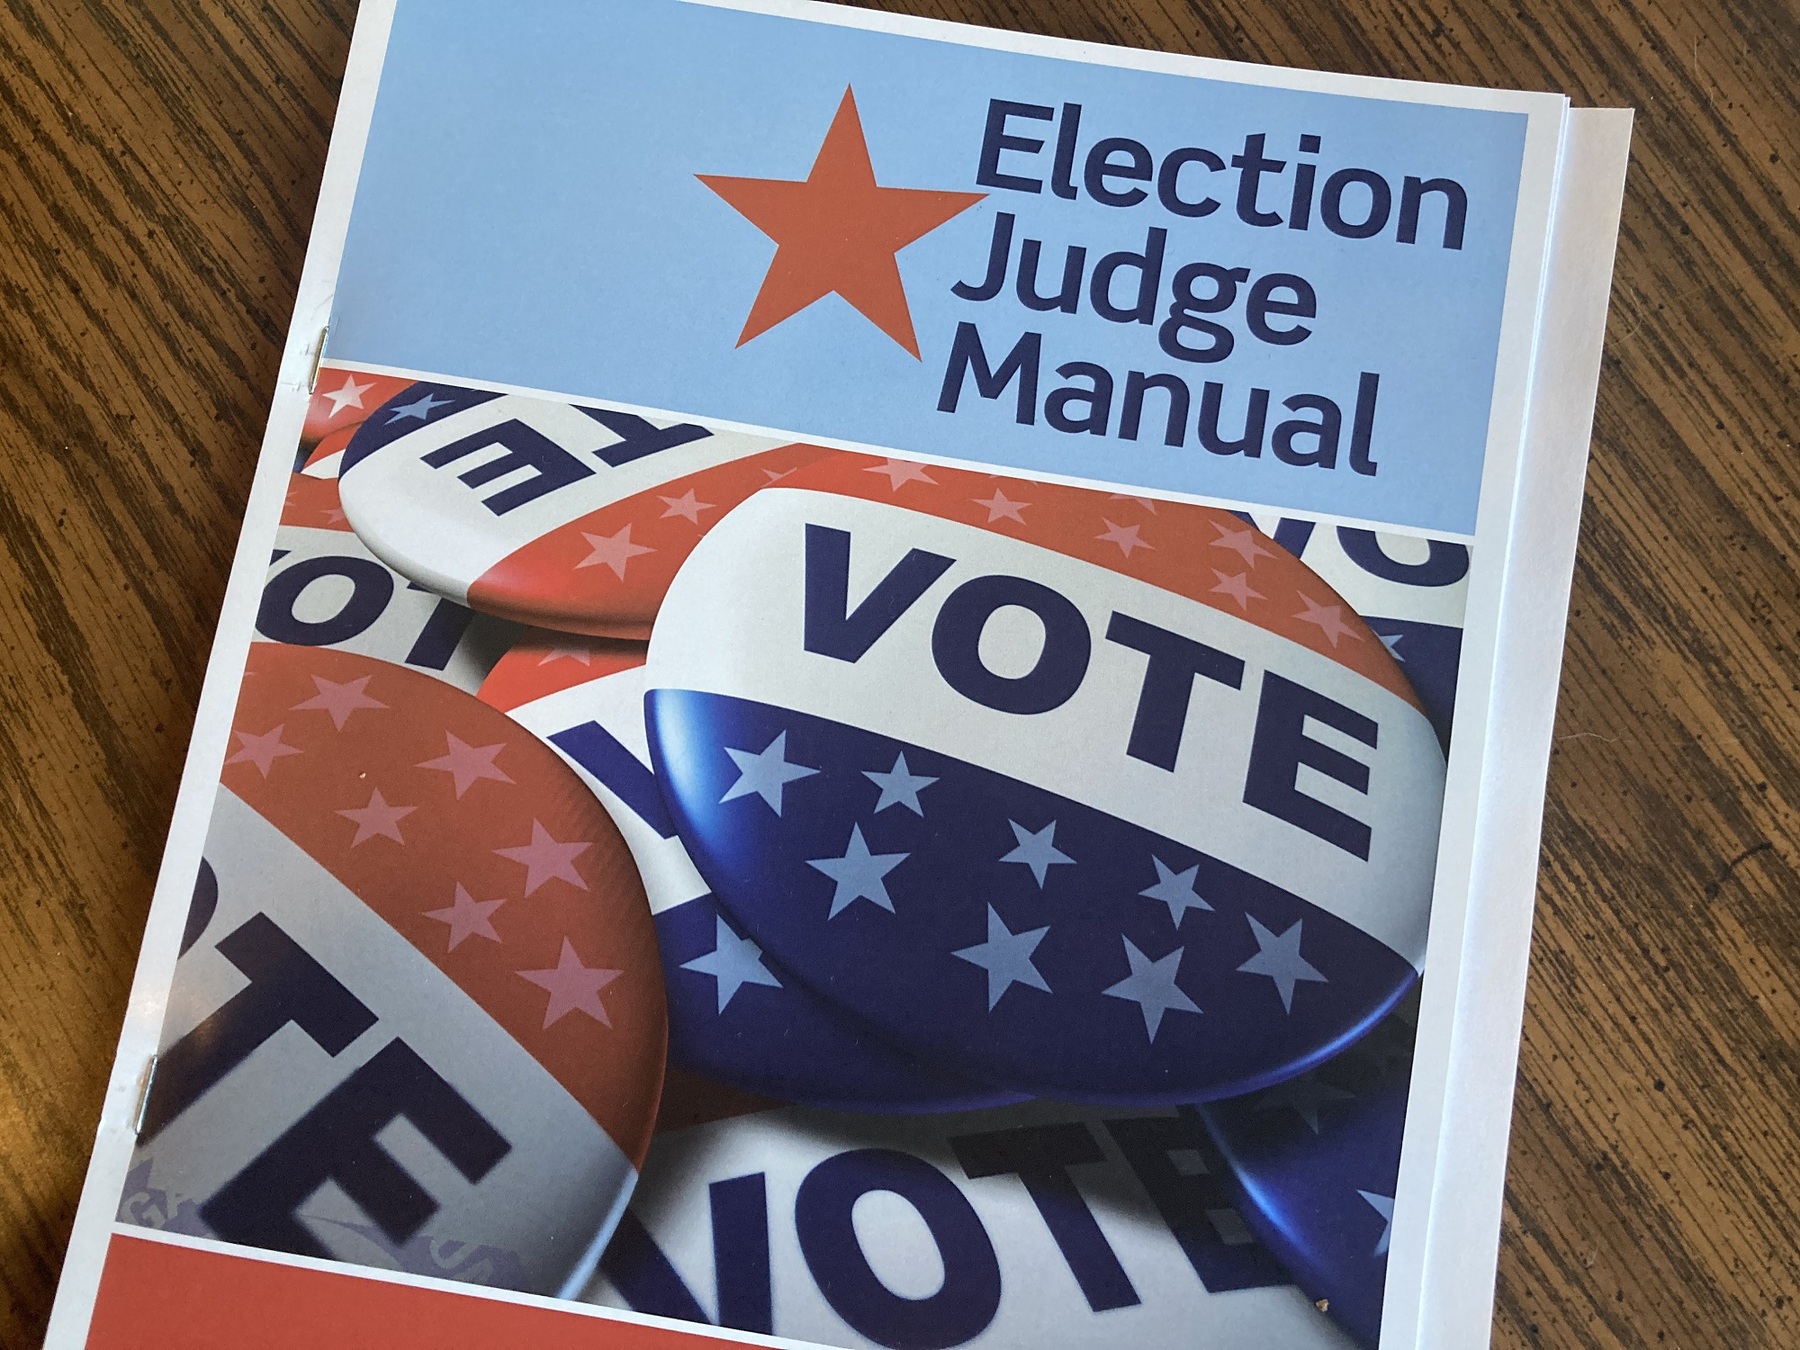 image of an Election Judge Manual